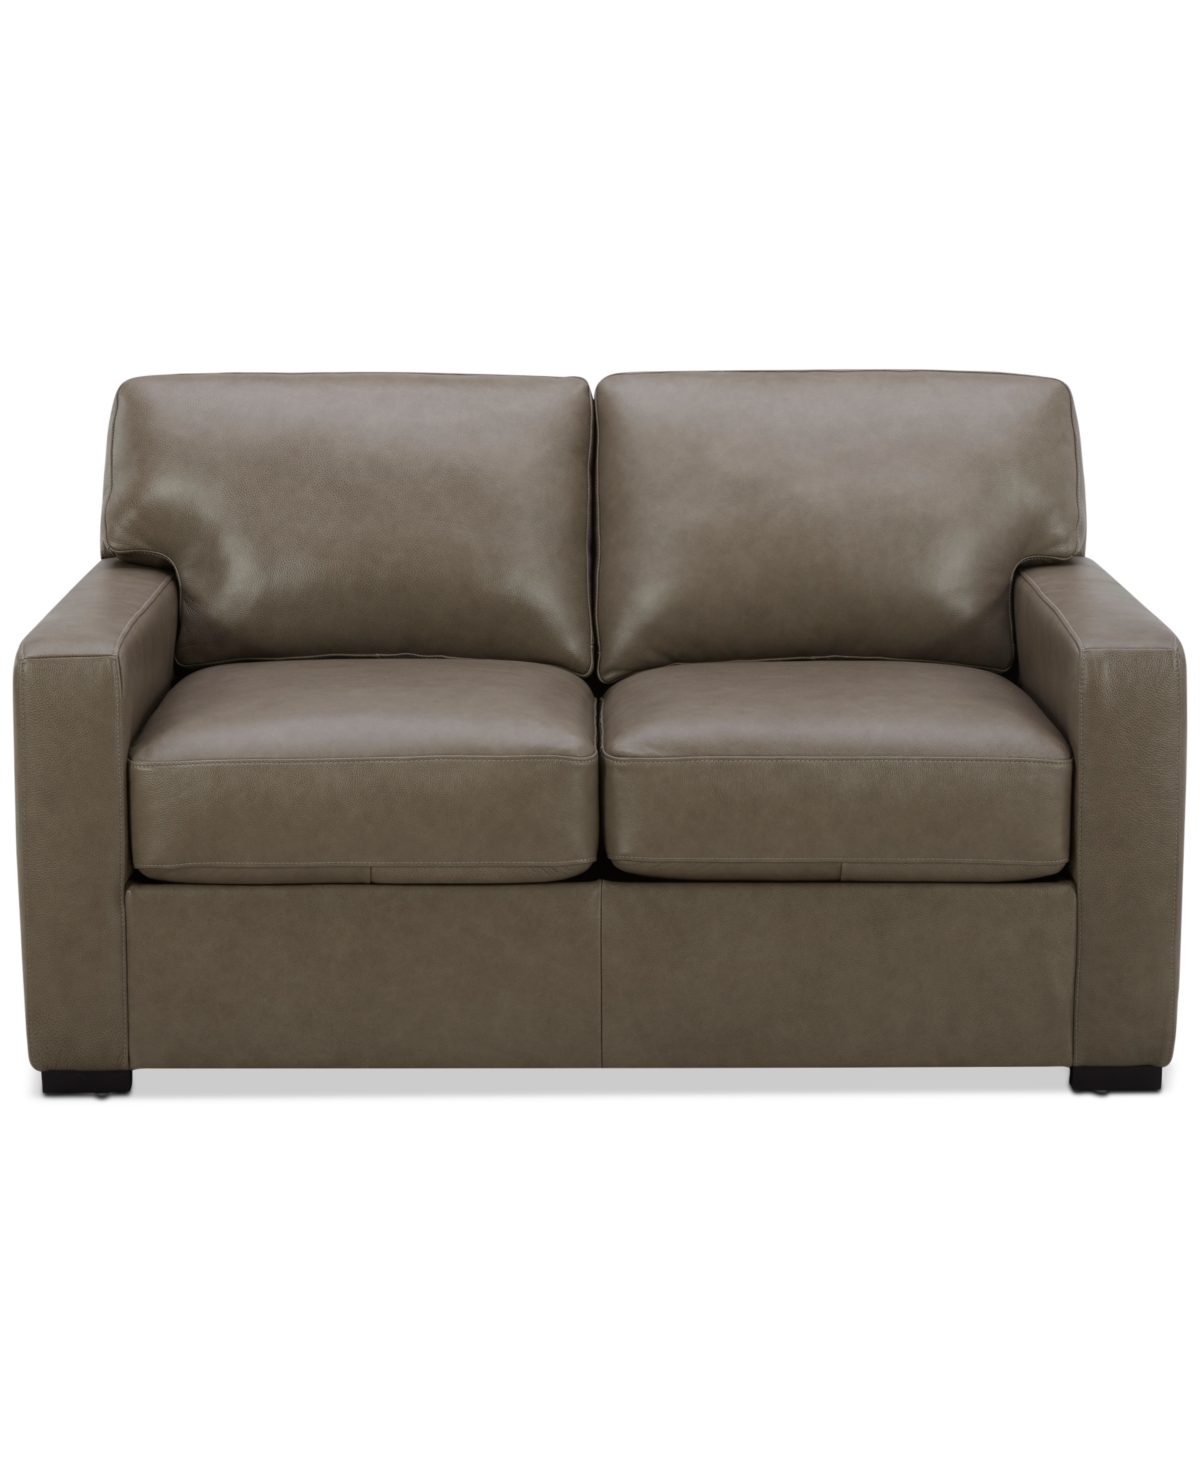 Macy's Radley 61" Leather Loveseat, Created For  In Taupe